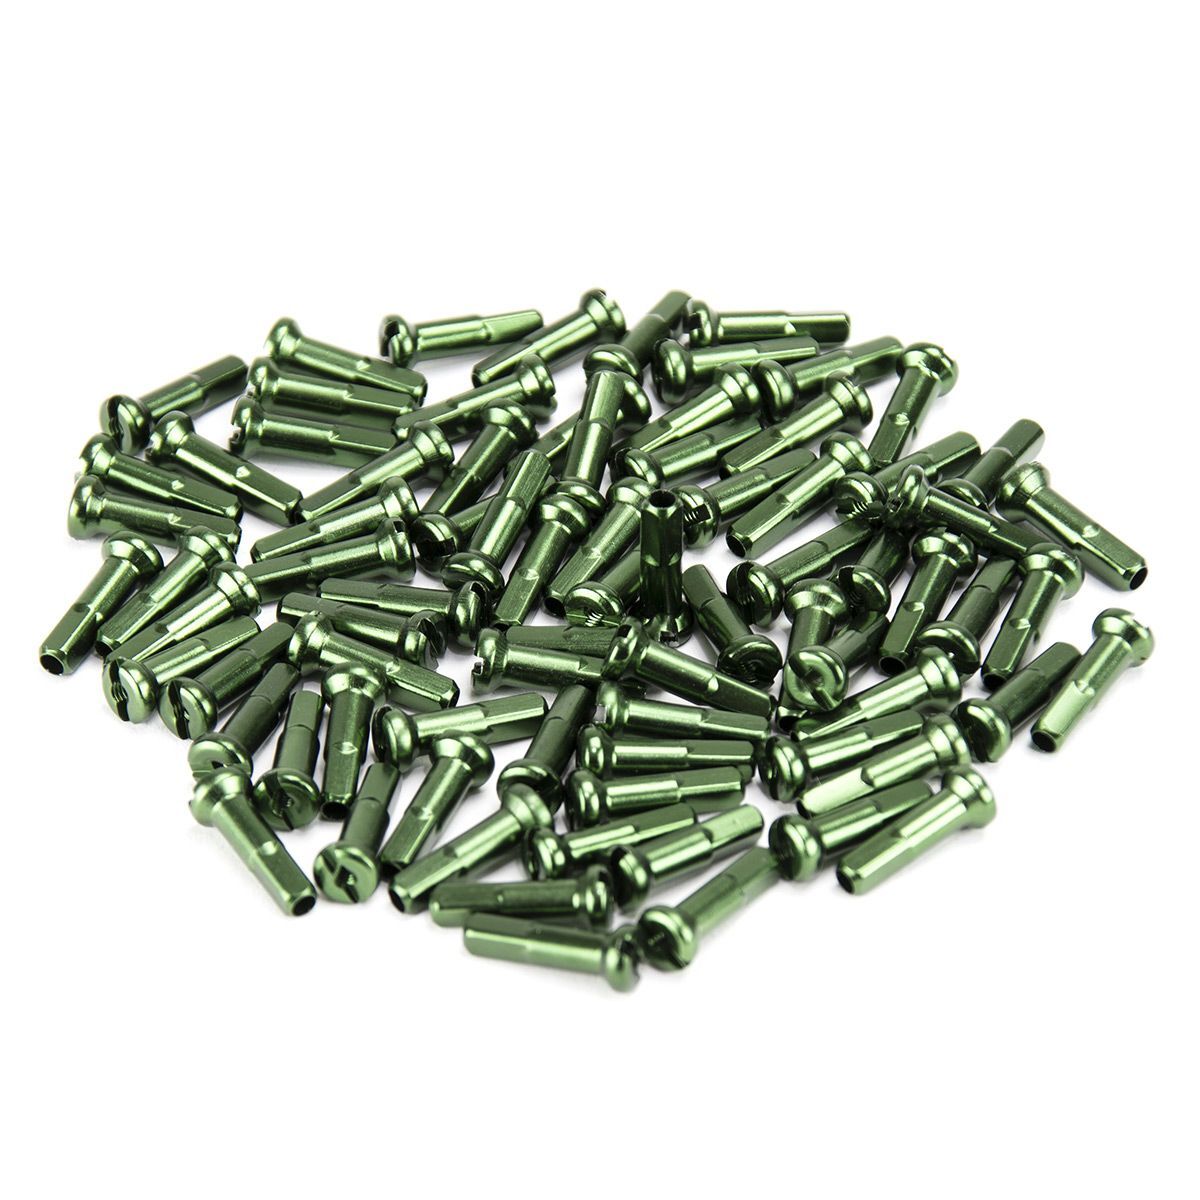 A pile of Excess Alloy Nipples 80 Pack, each 16mm in length, on a white background.